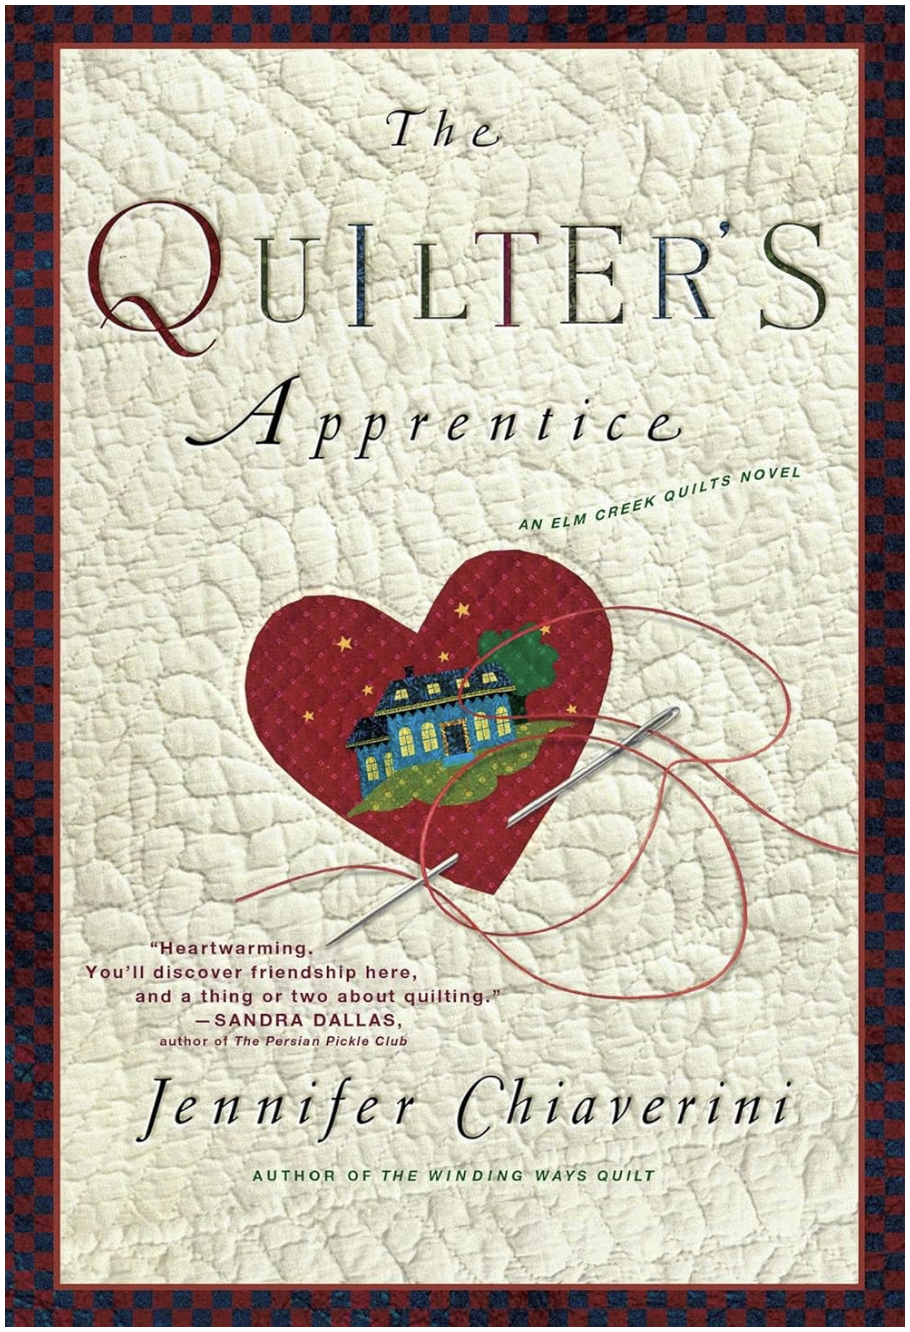 The quilters apprentice